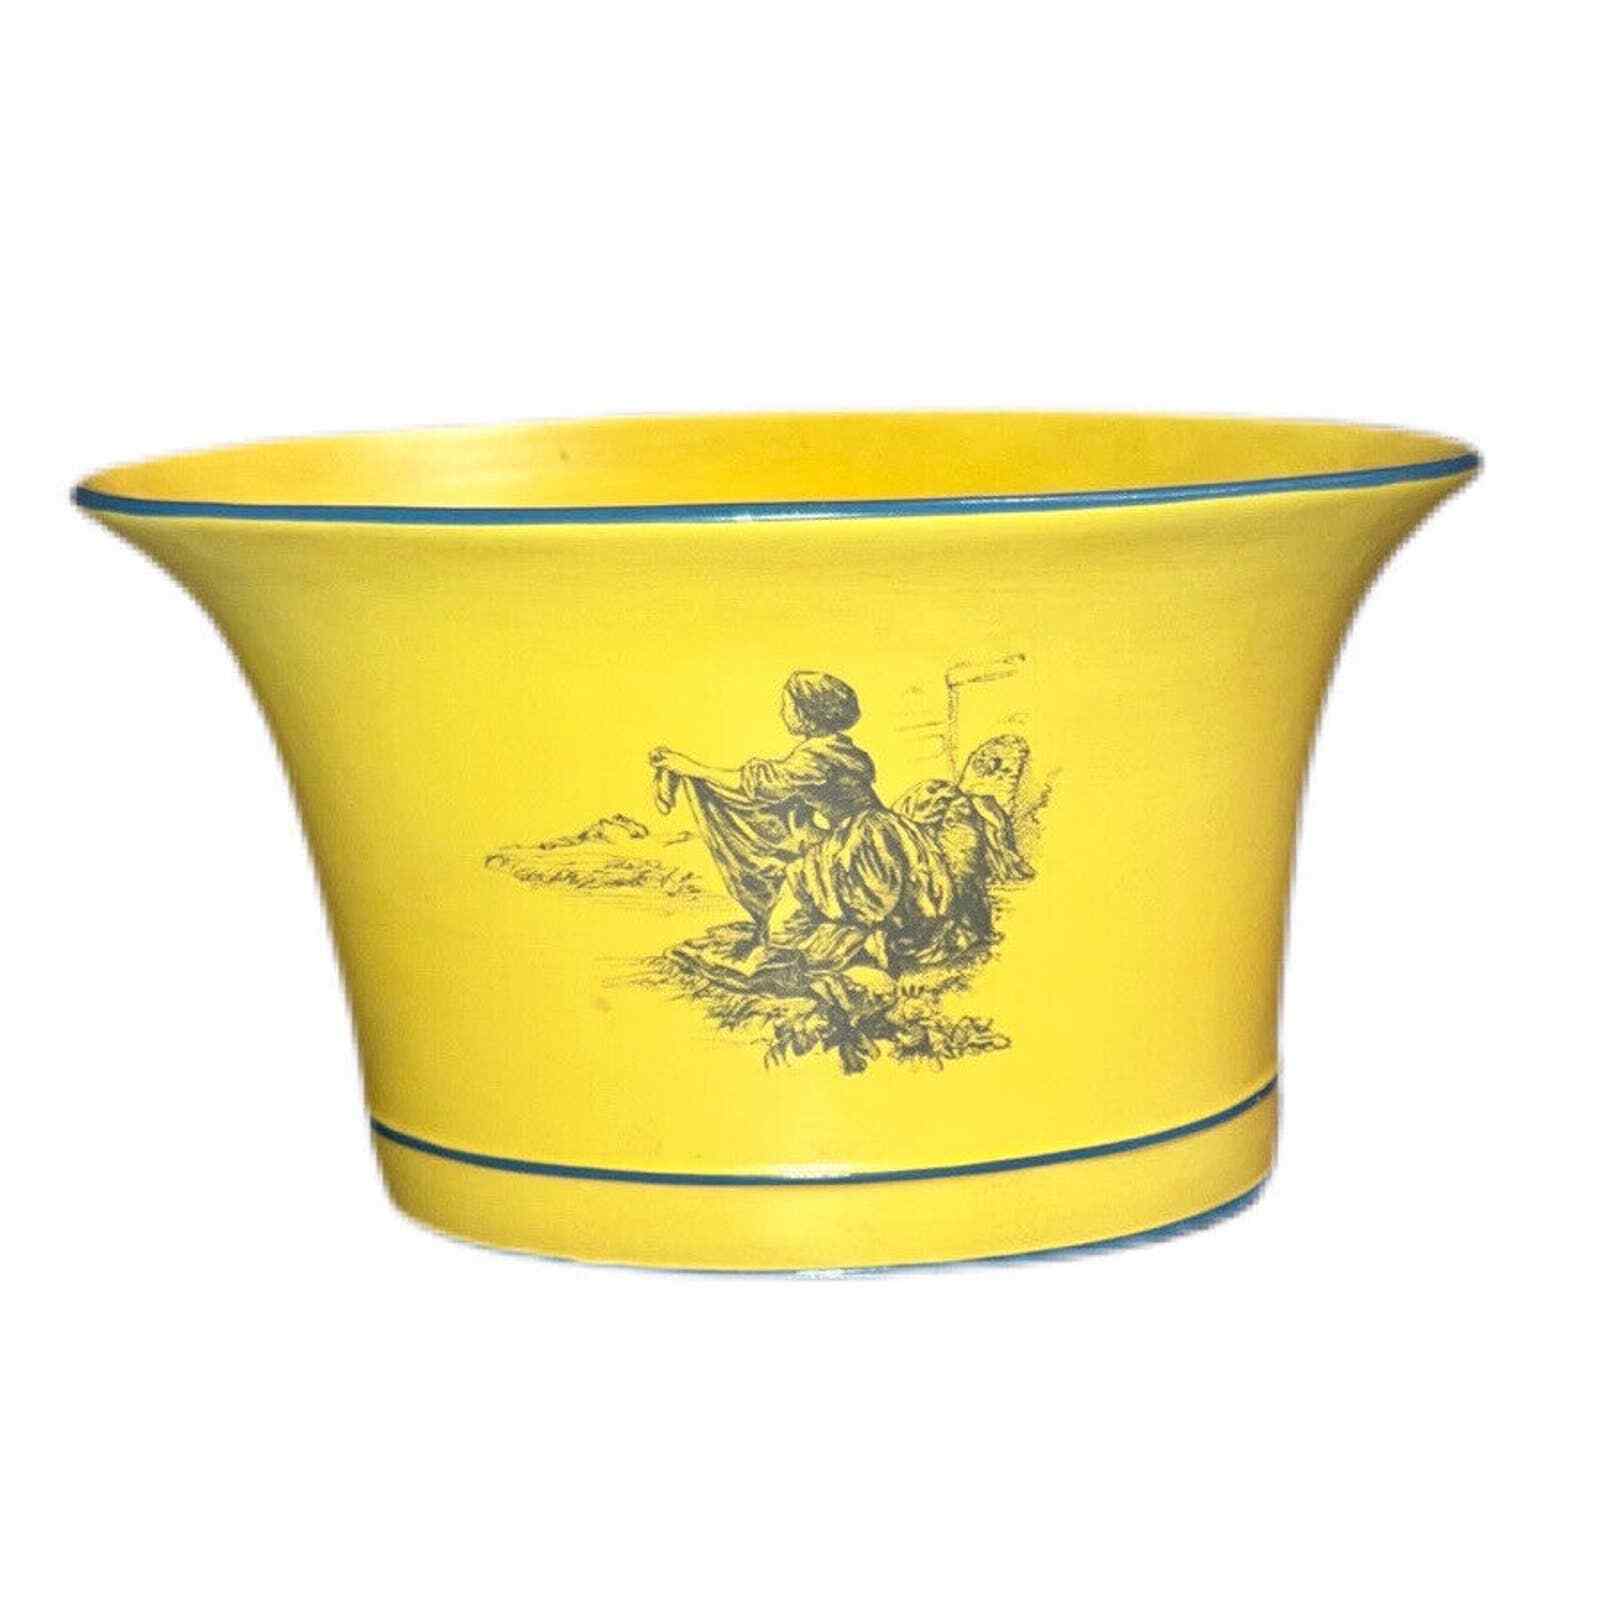 Vintage Chelsea House Cachepot Planter Italy Yellow And Blue Hand Painted